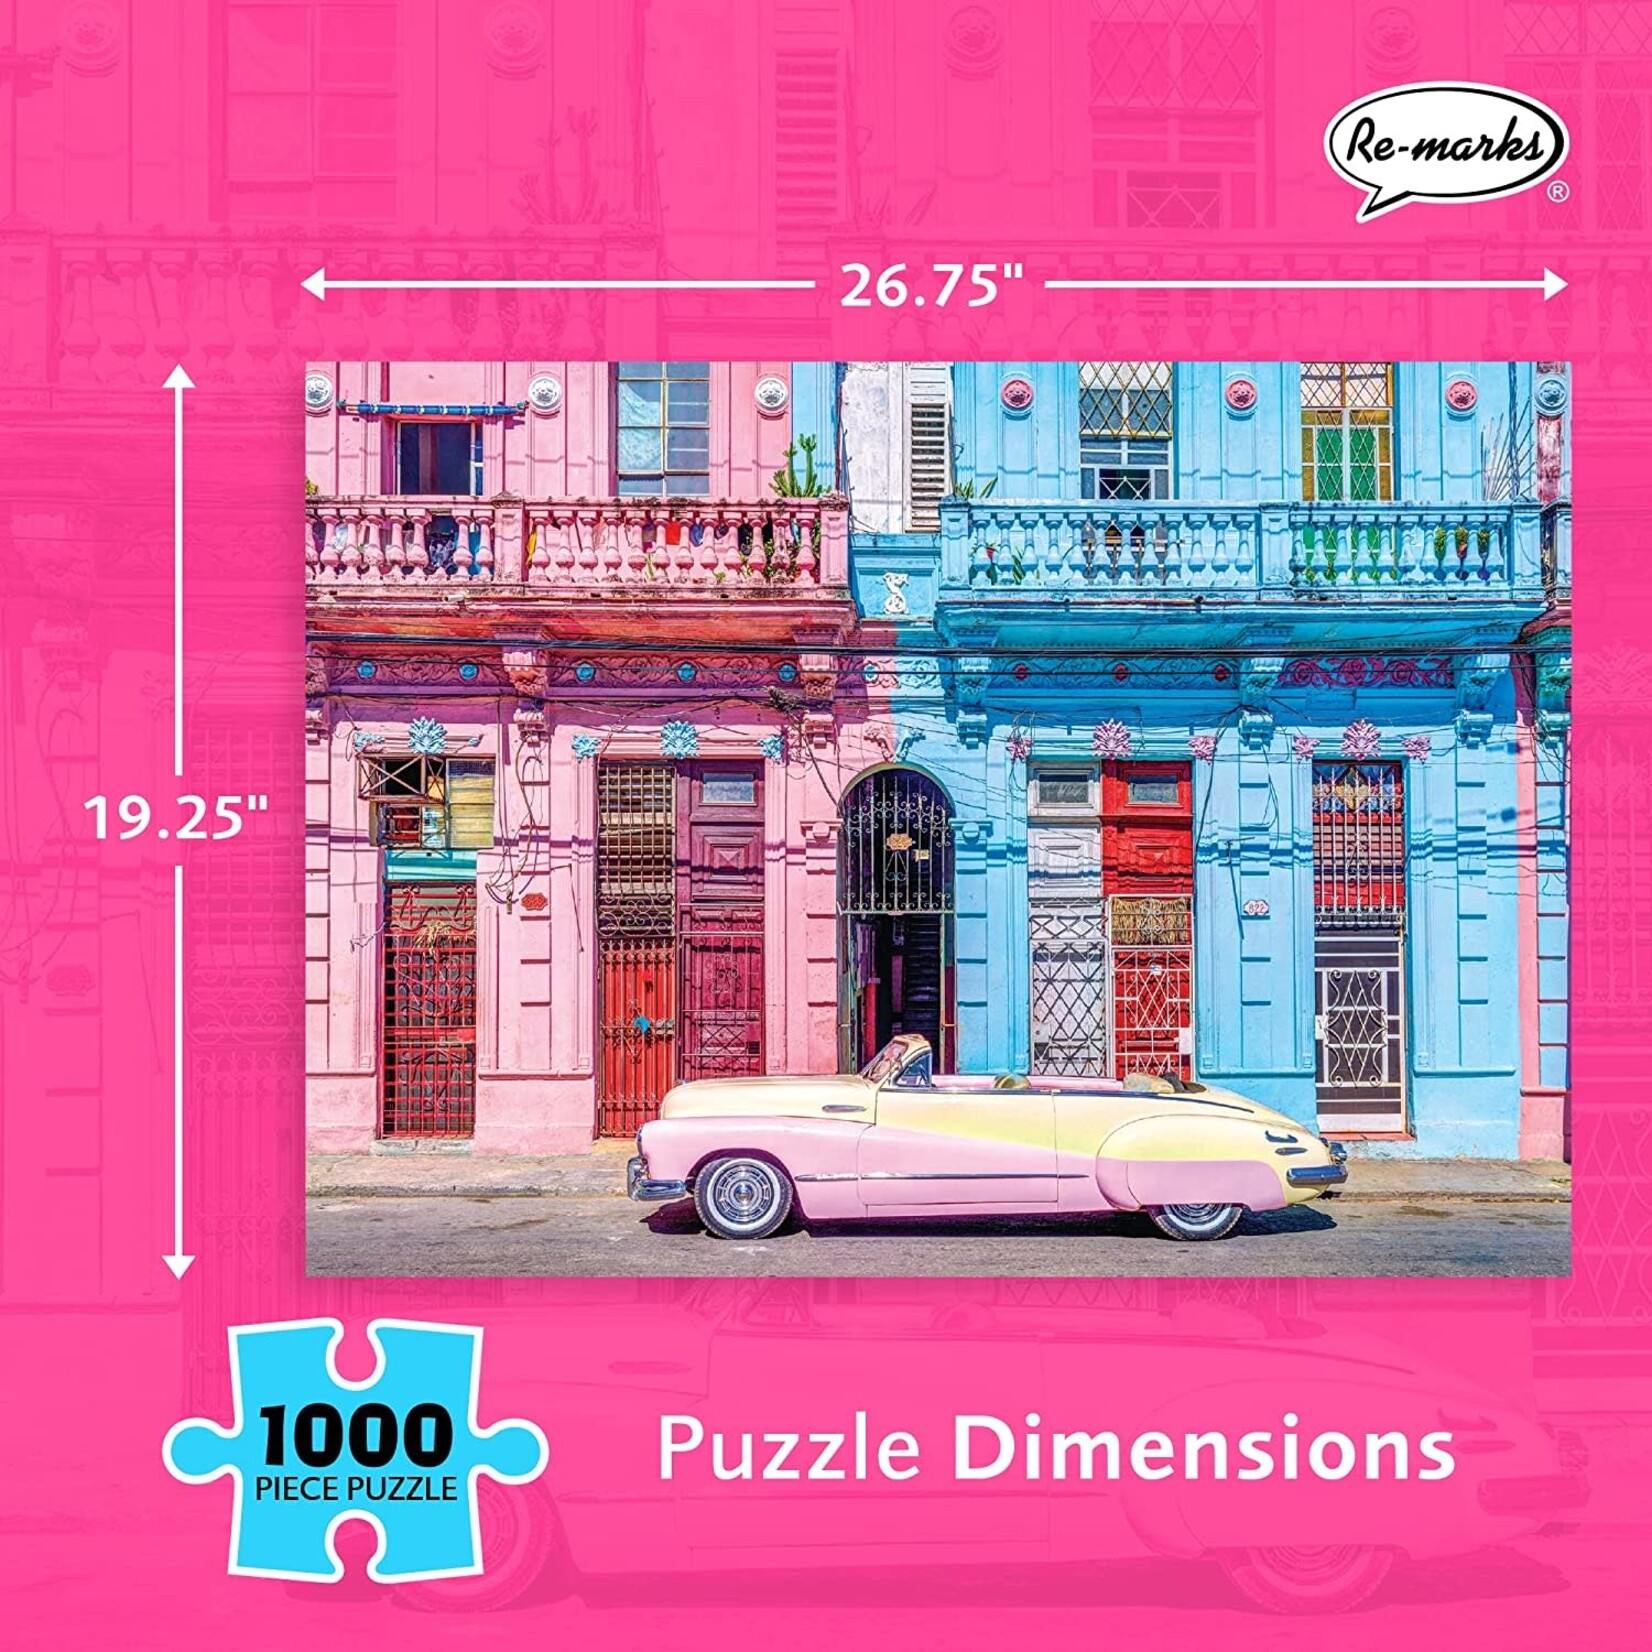 Remarks Puzzles 1000 PIECE SUMMERTIME PUZZLE